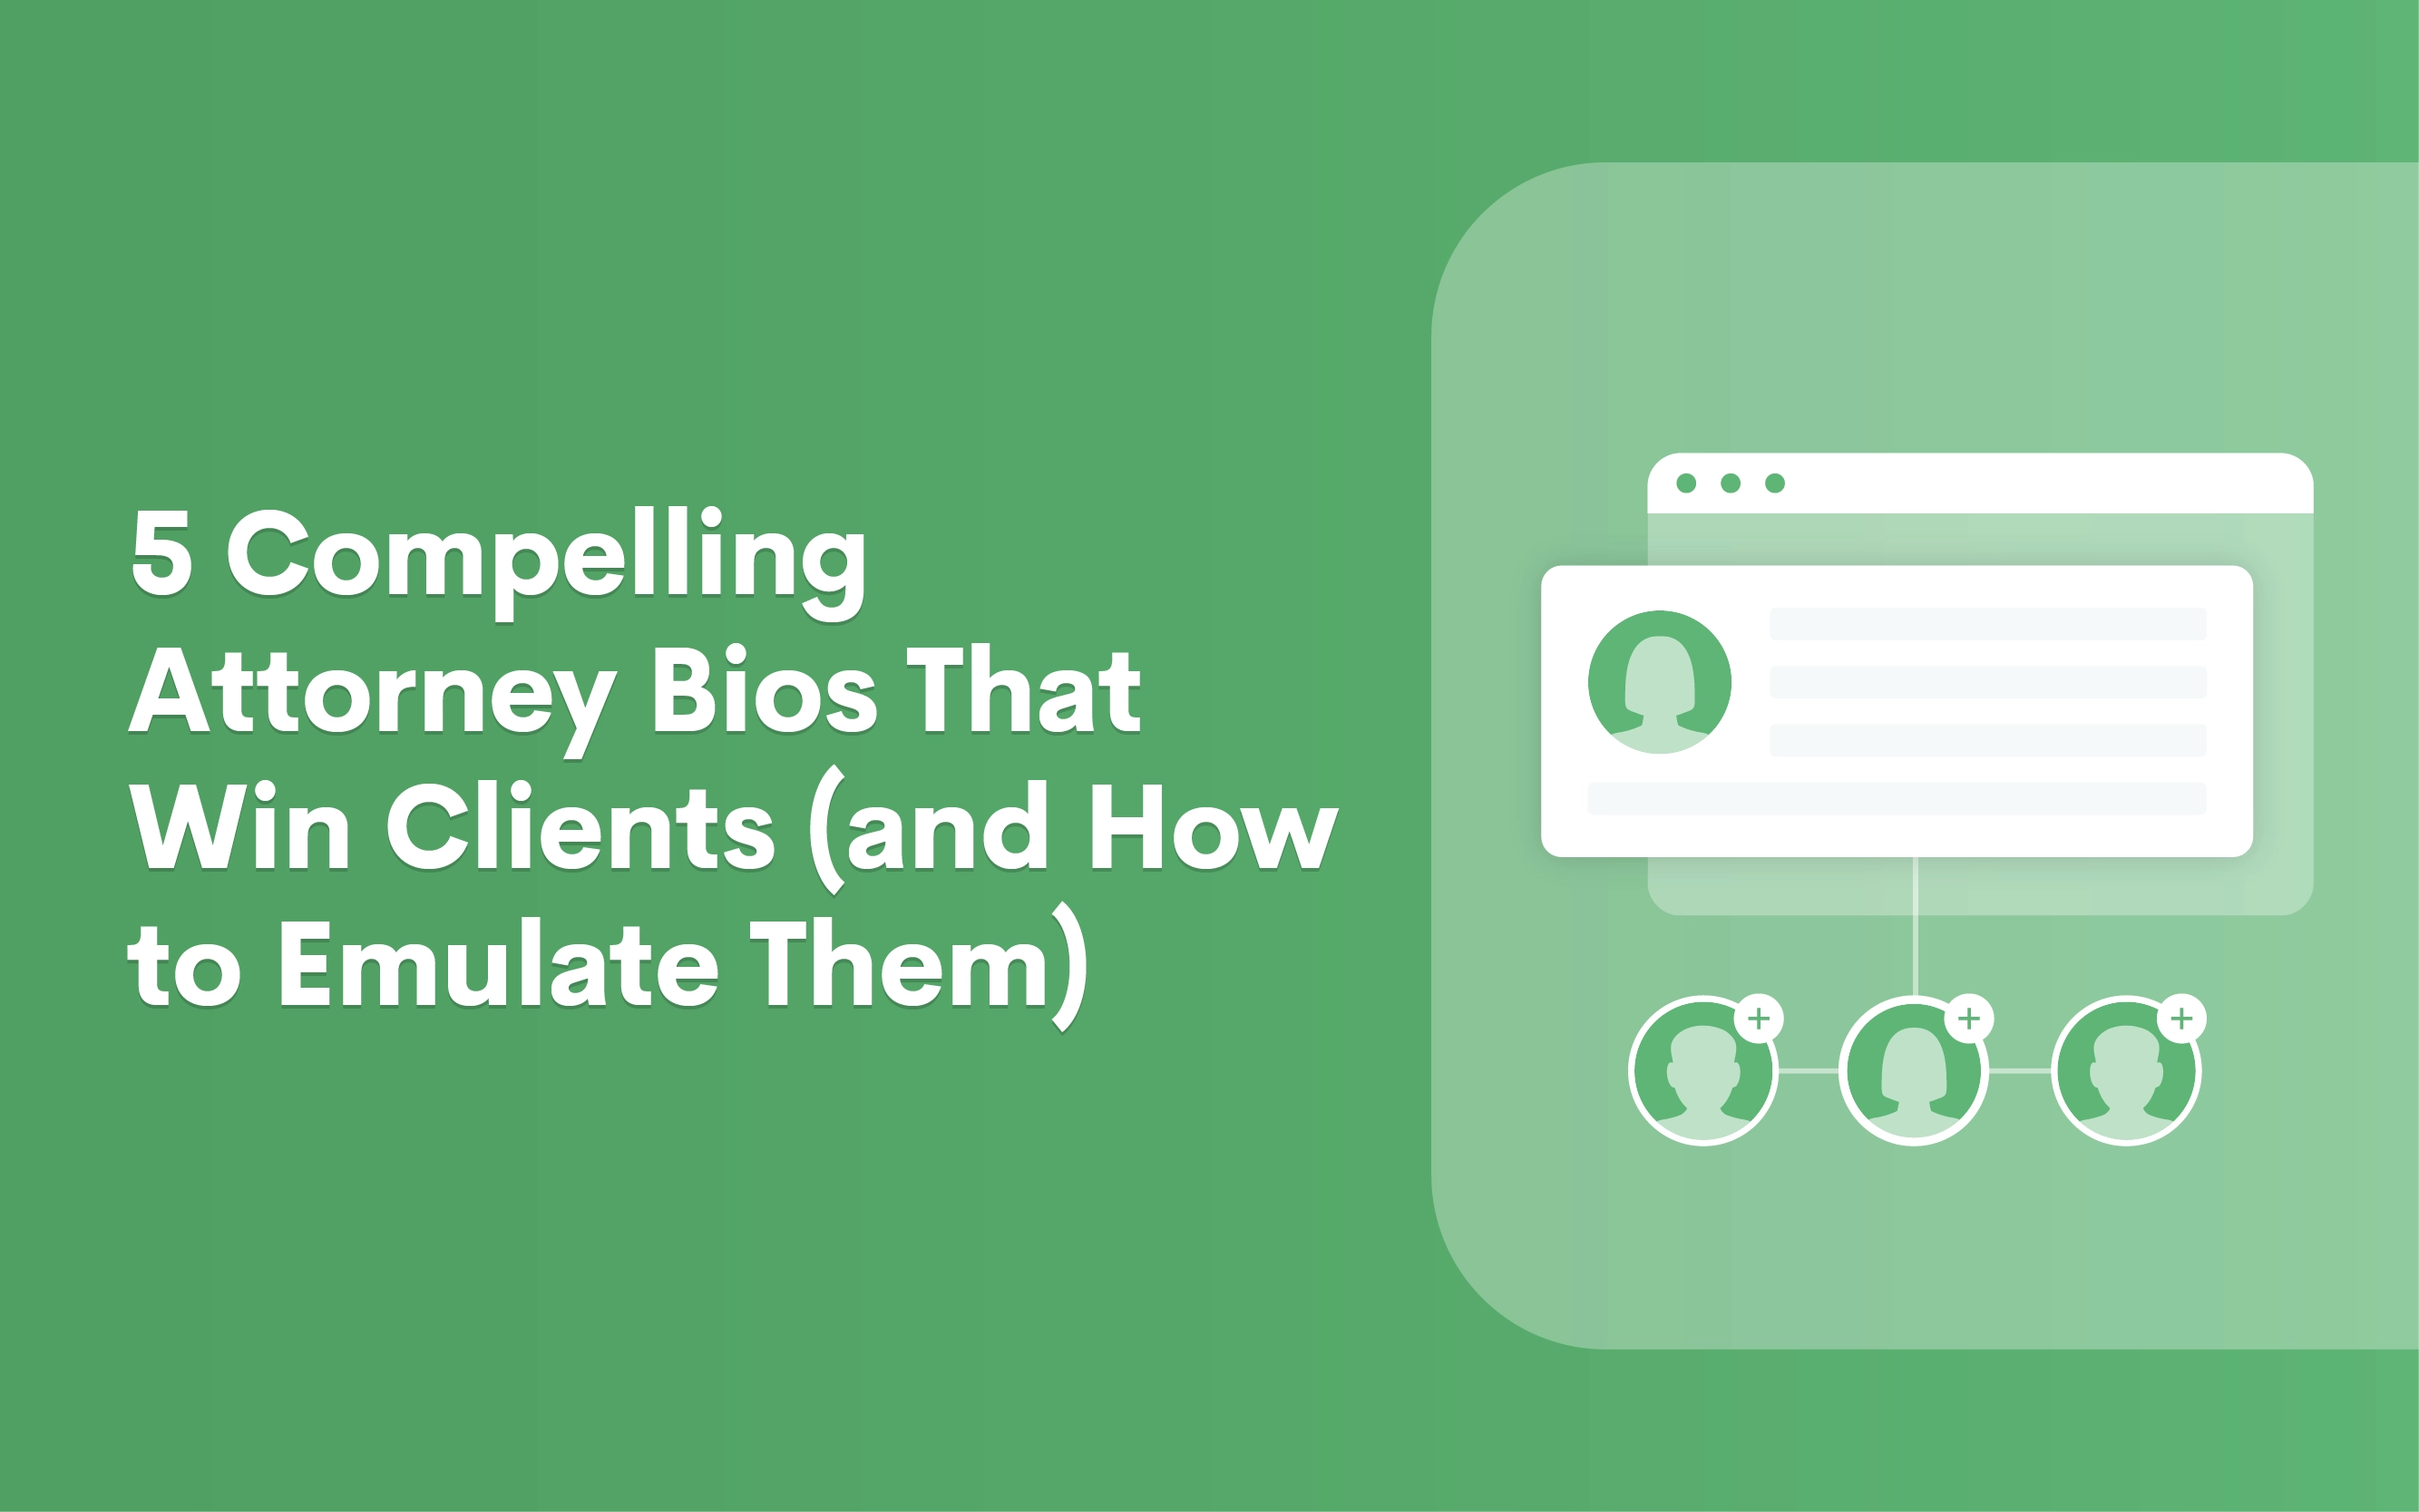 5-Compelling-Attorney-Bios-That-Win-Clients-and-How-to-Emulate-Them_BLOG-02